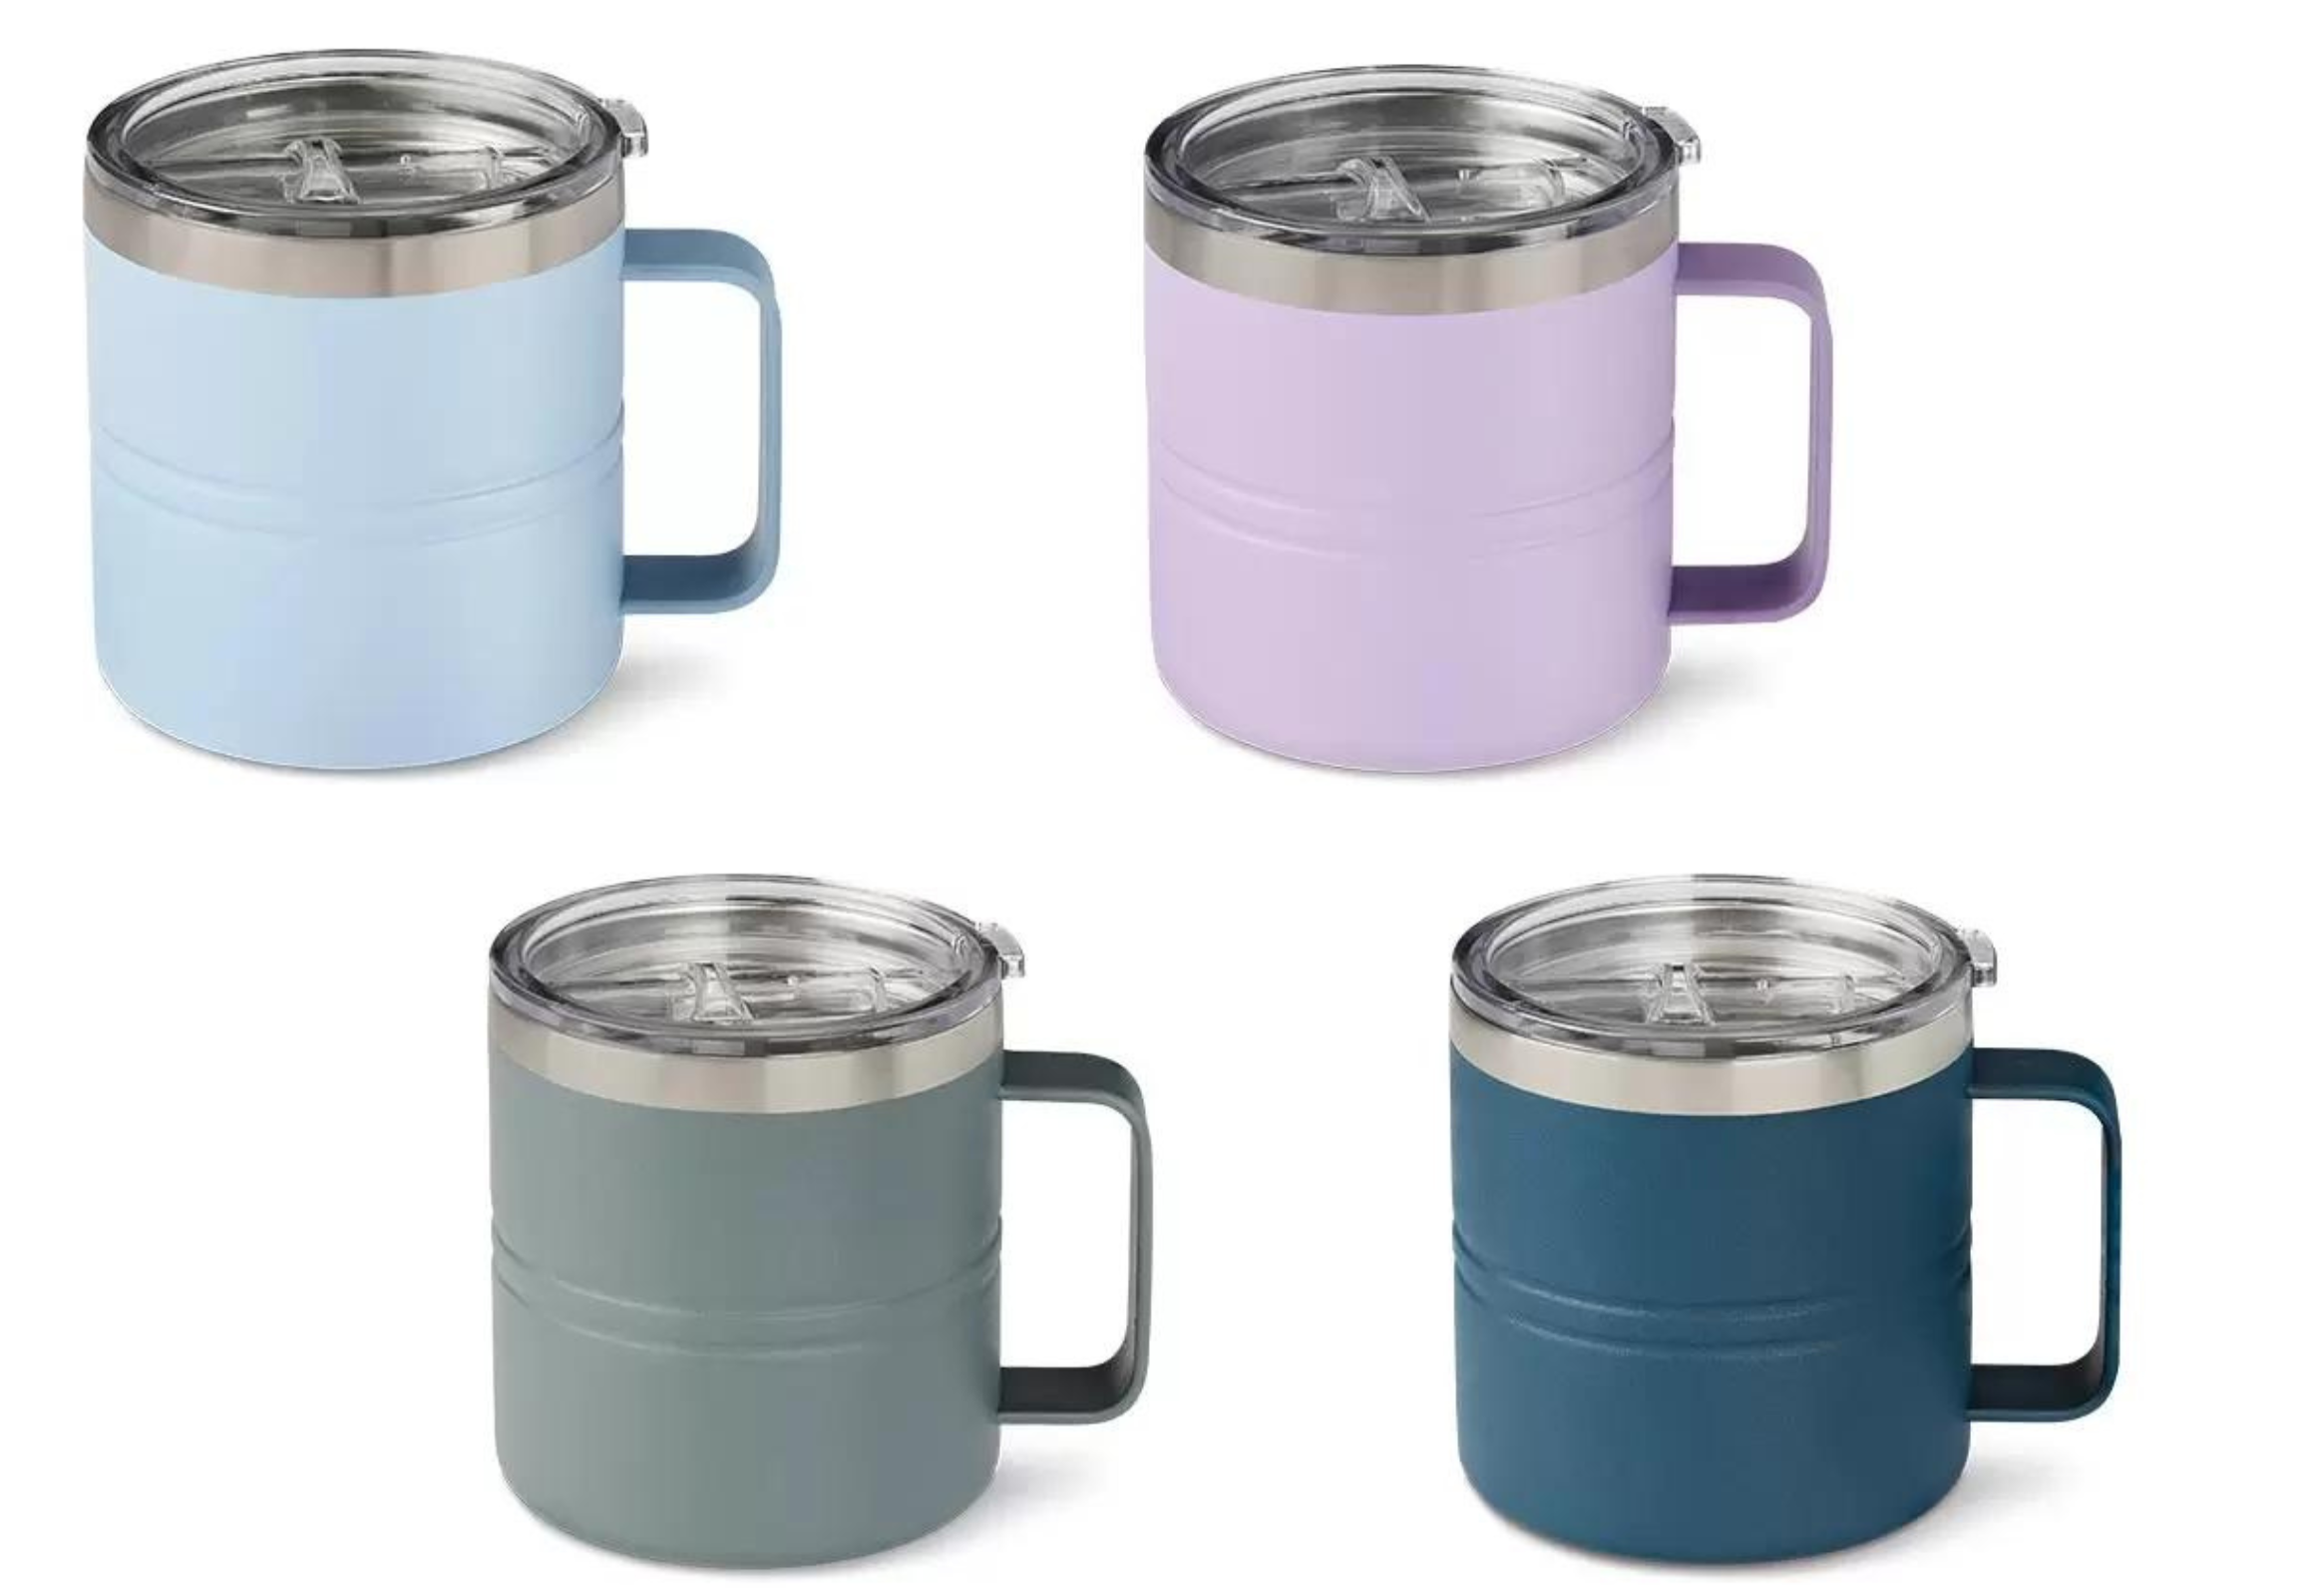 We Found Dupes For Stanley Cups, And They're All Only $10 At Aldi